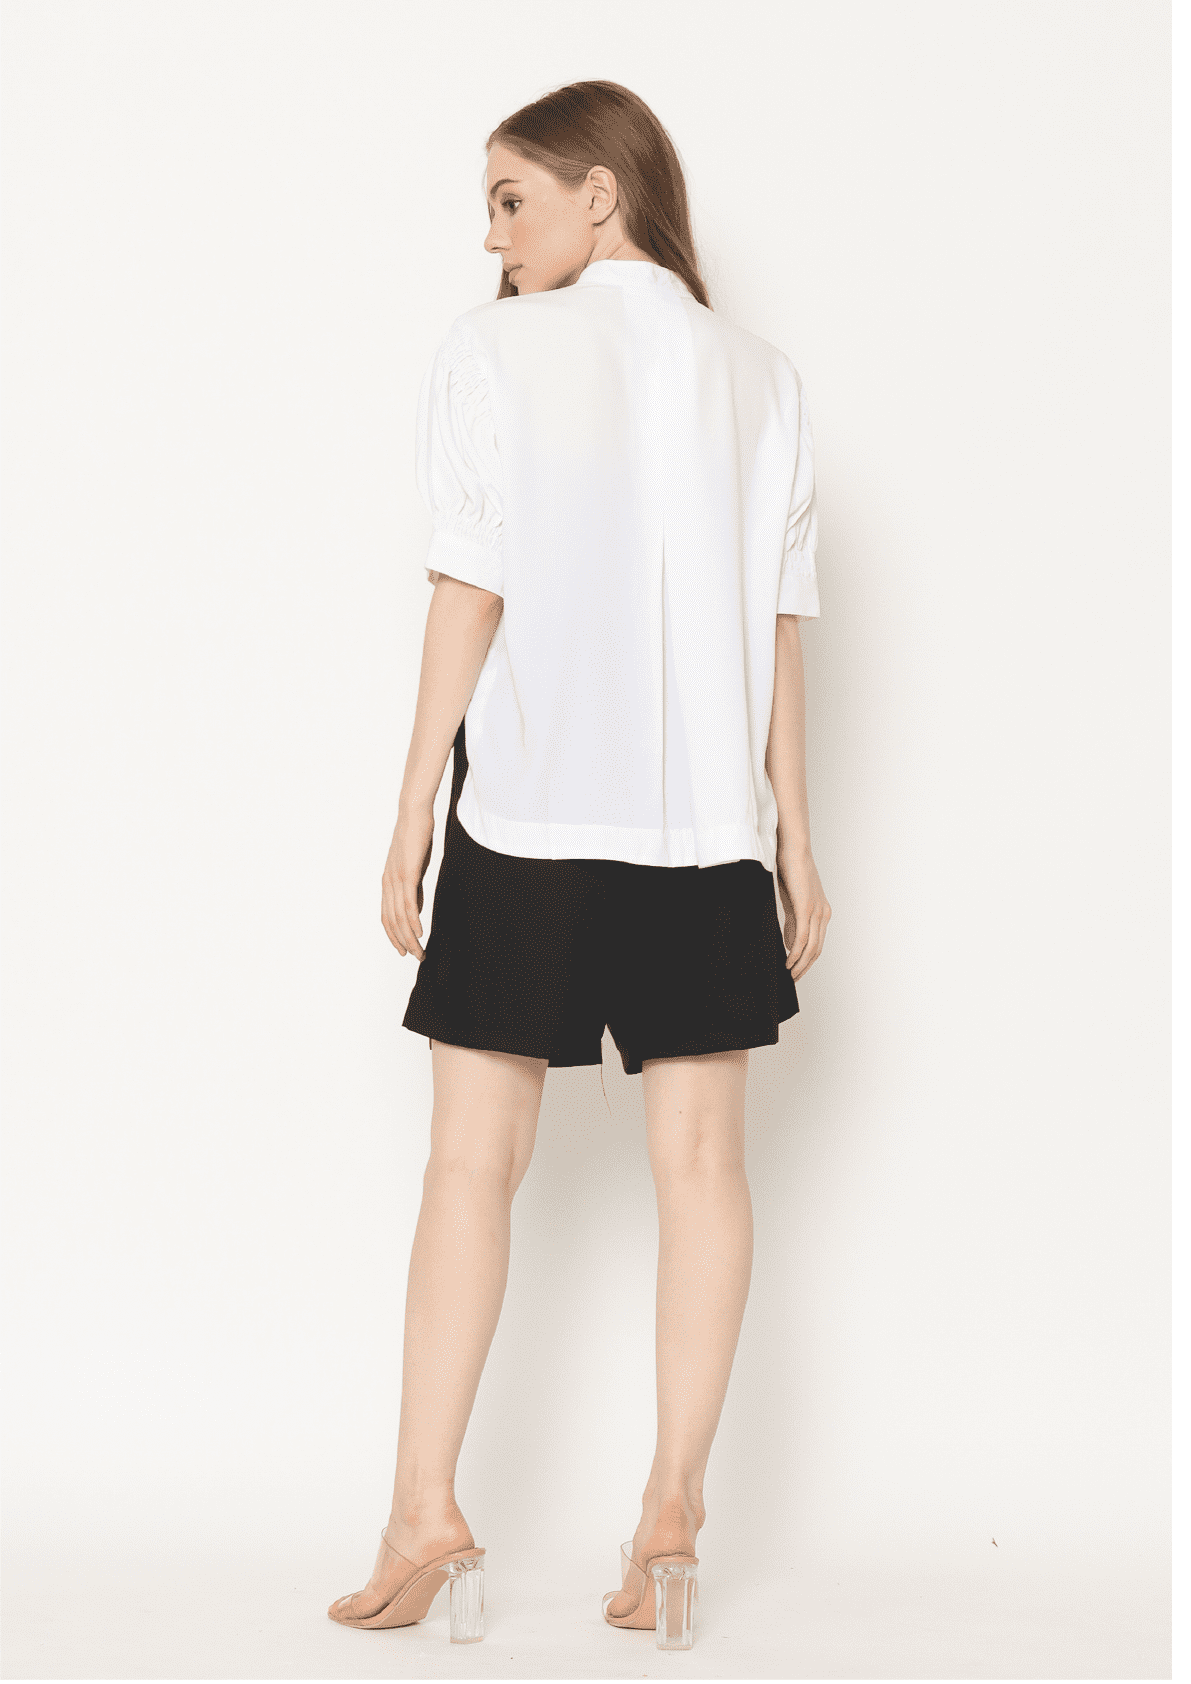 Terry. Buttoned Flowy Blouse - White